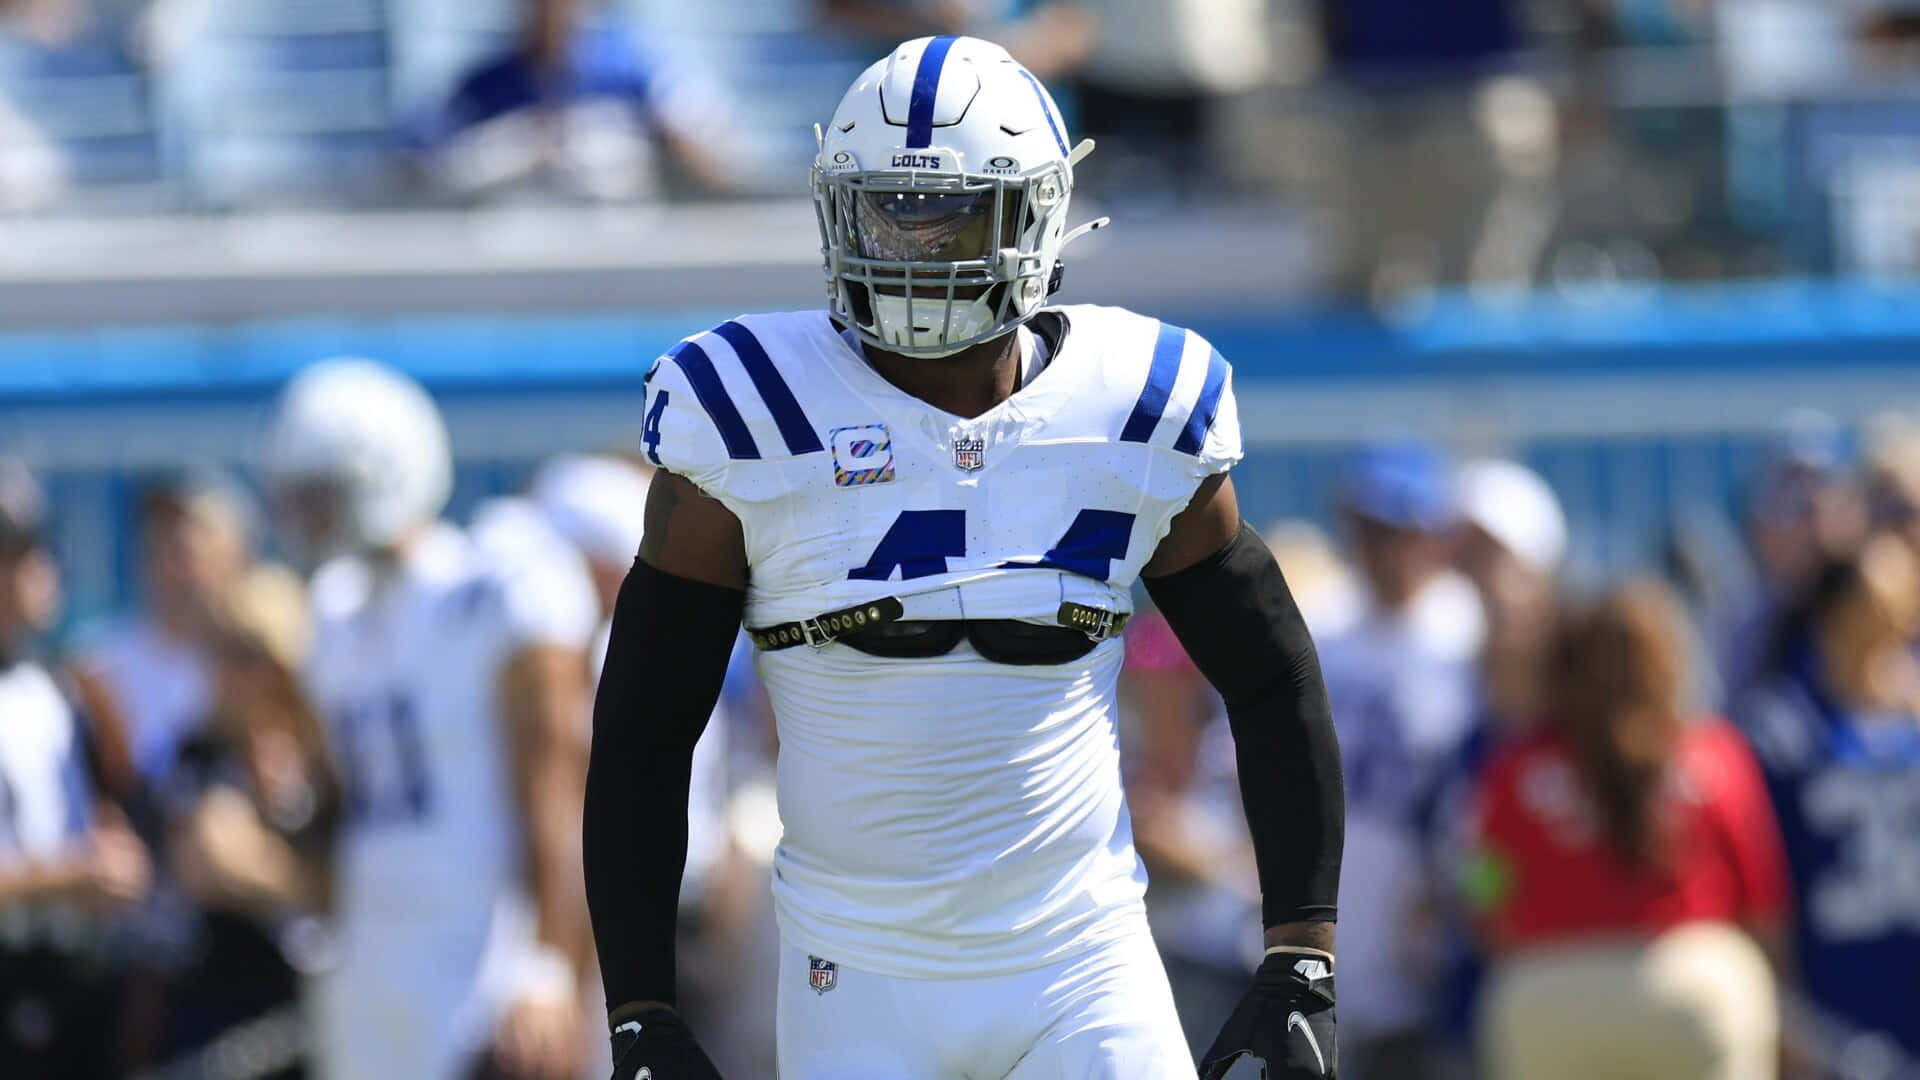 Zaire Franklin Indianapolis Colts Linebacker Game Day Wallpaper